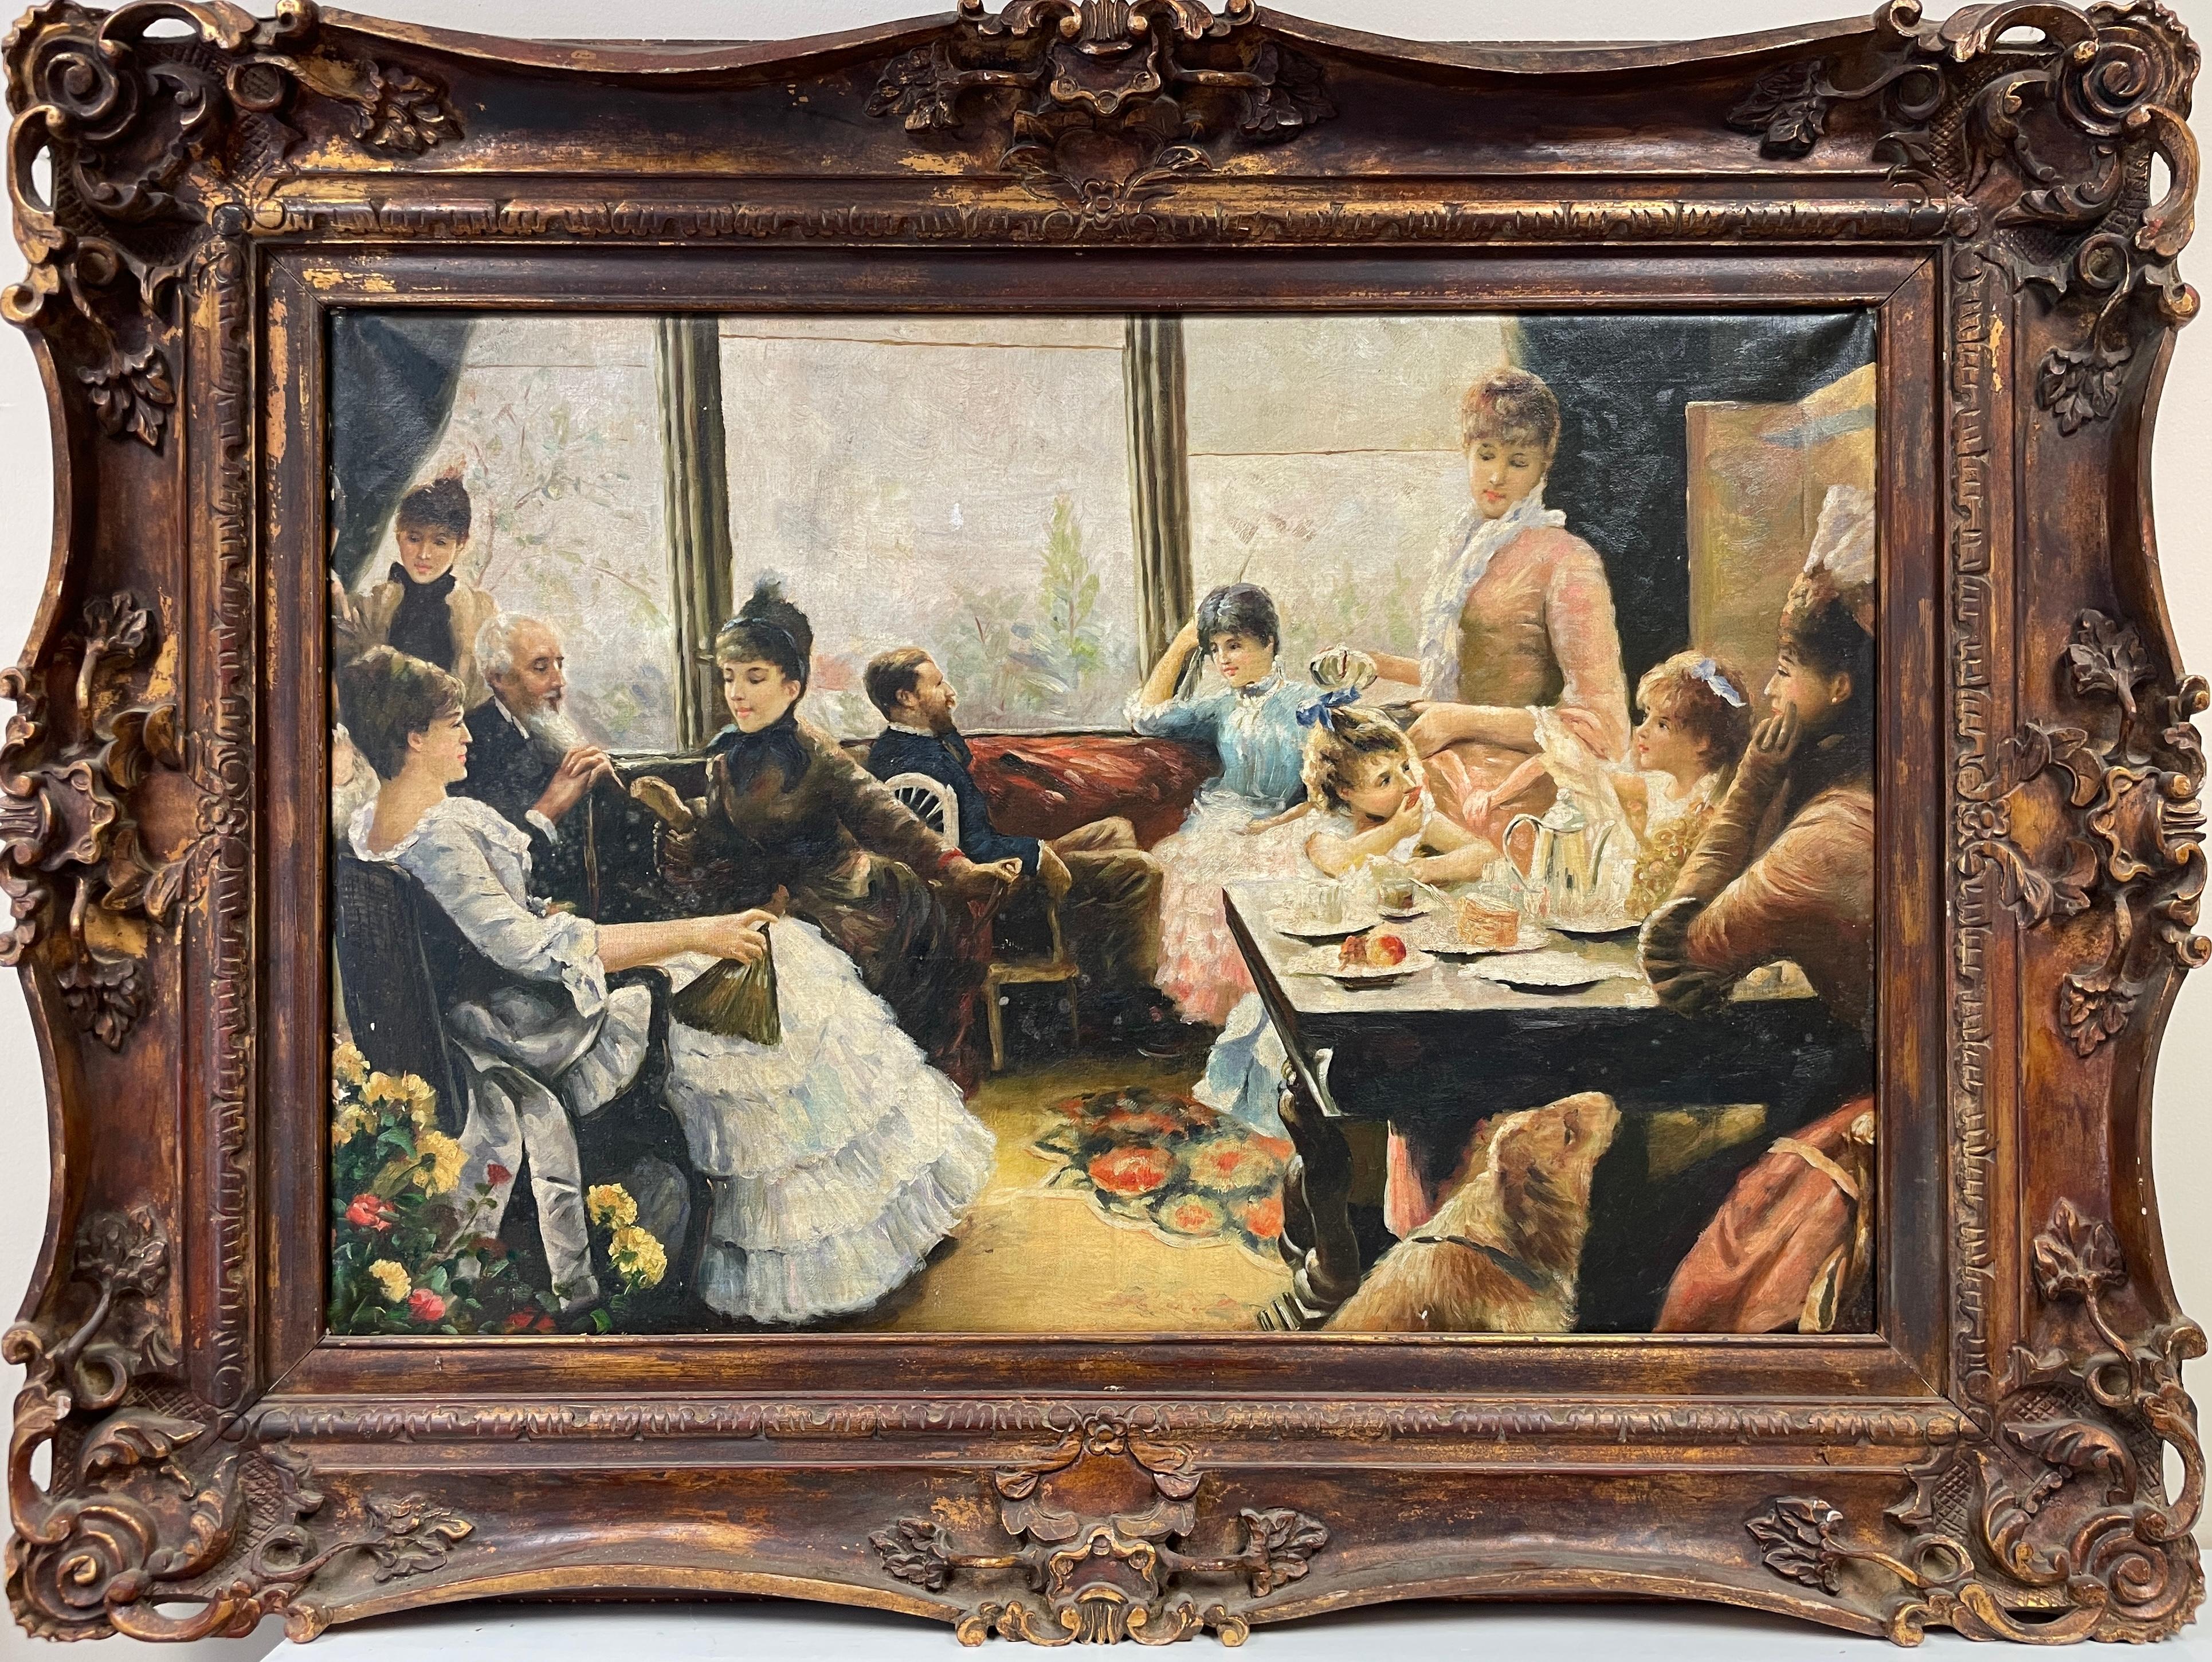 French School, 20th century
oil painting on canvas, framed
framed size: 35 x 47 inches
condition: overall very good, some minor staining to the surface. 
frame: beautiful quality gilt swept frame of substantial proportions
provenance: from a private